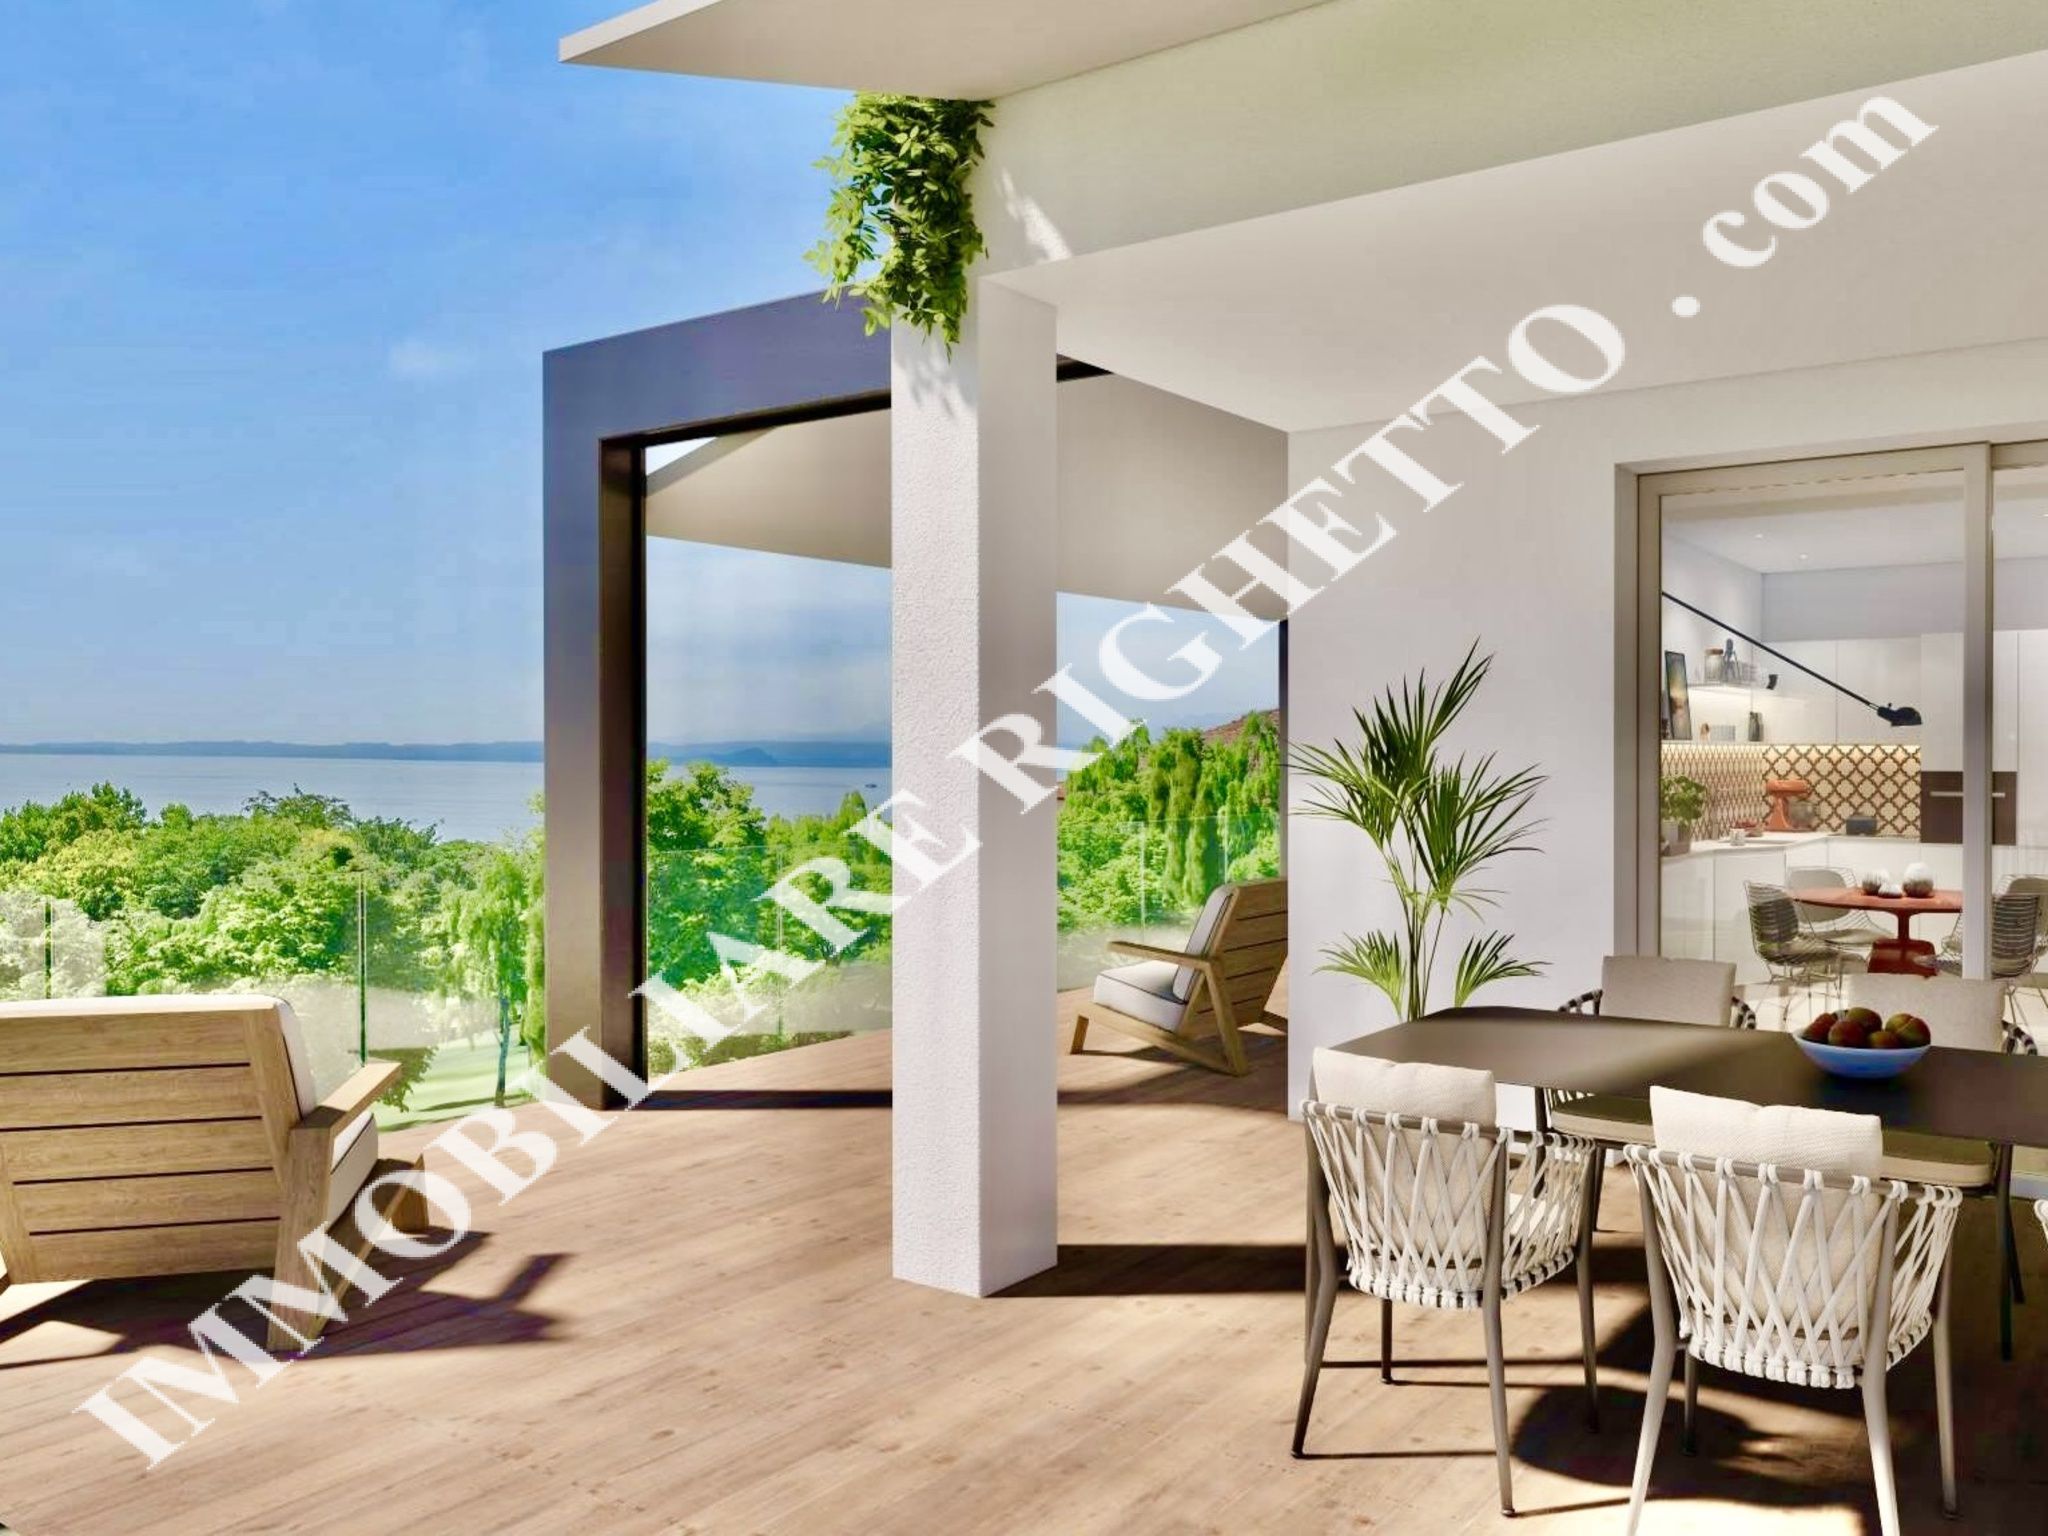 offer real estate for sale RESIDENCE VILLA MARTA: BRAND NEW-flats with large terraces and STUNNING LAKE VIEW